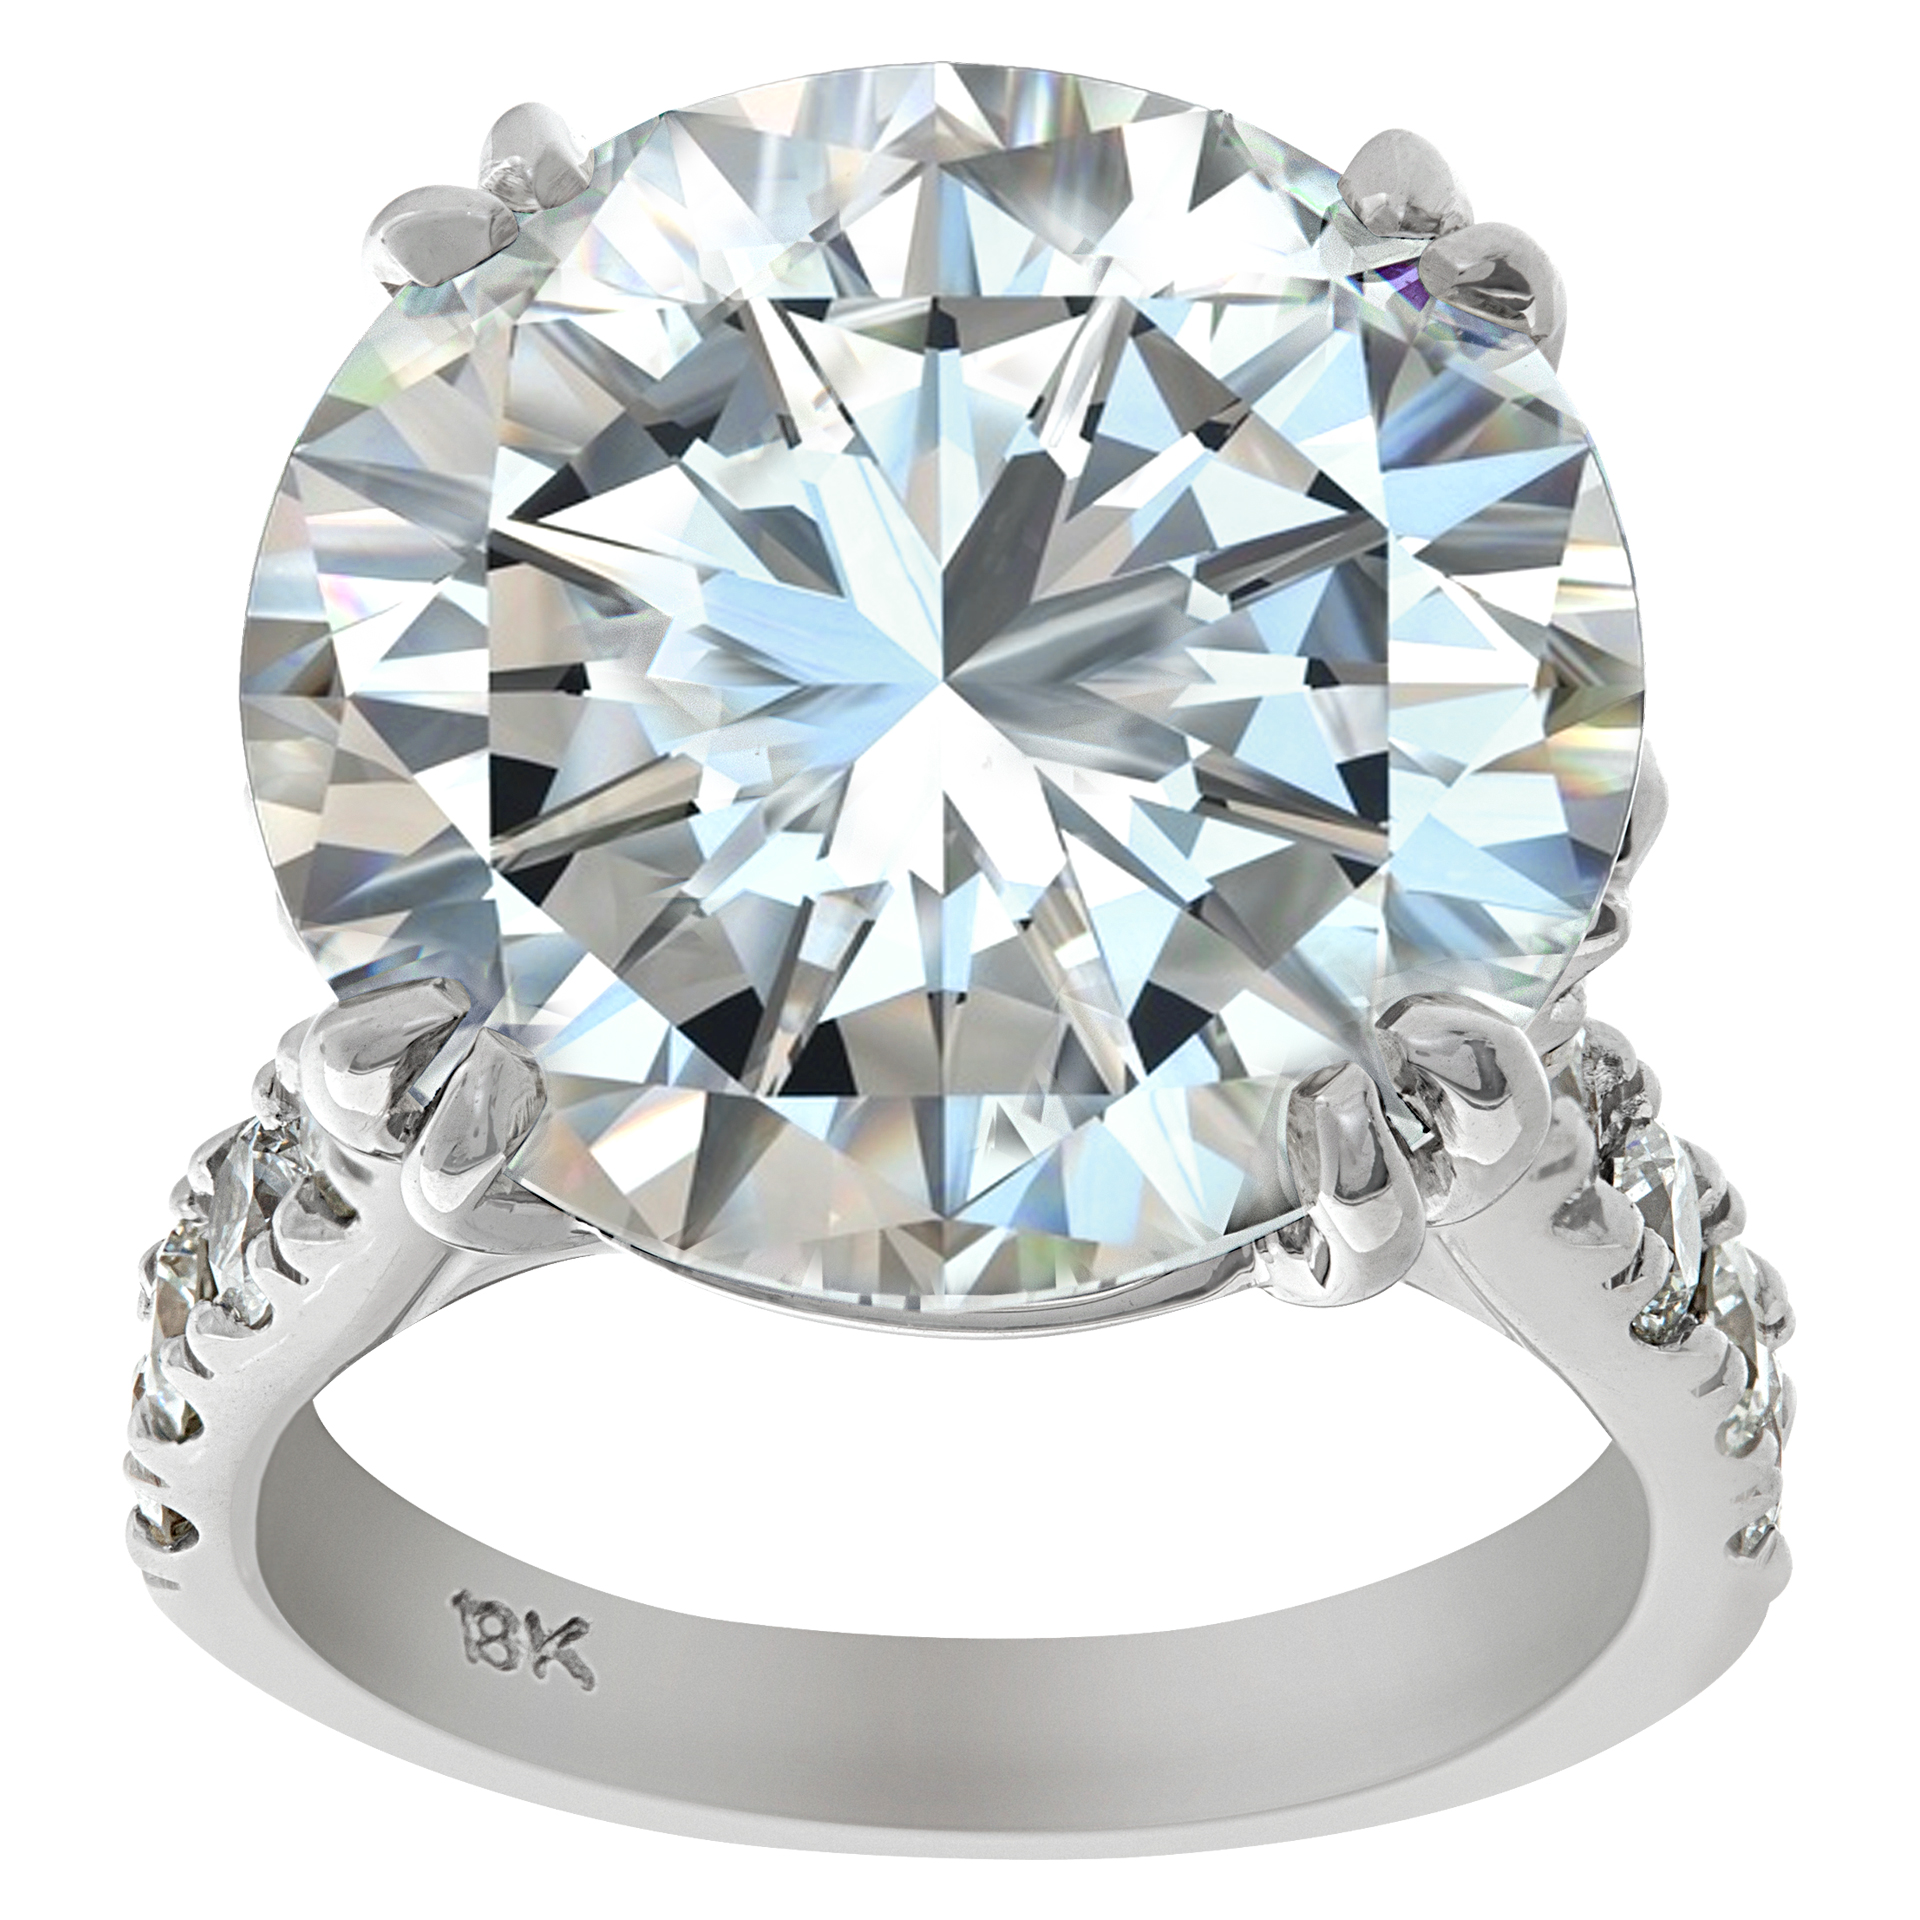 GIA Certified 16.92 carats round brilliant cut diamond set in 18K diamonds white gold ring. I color,